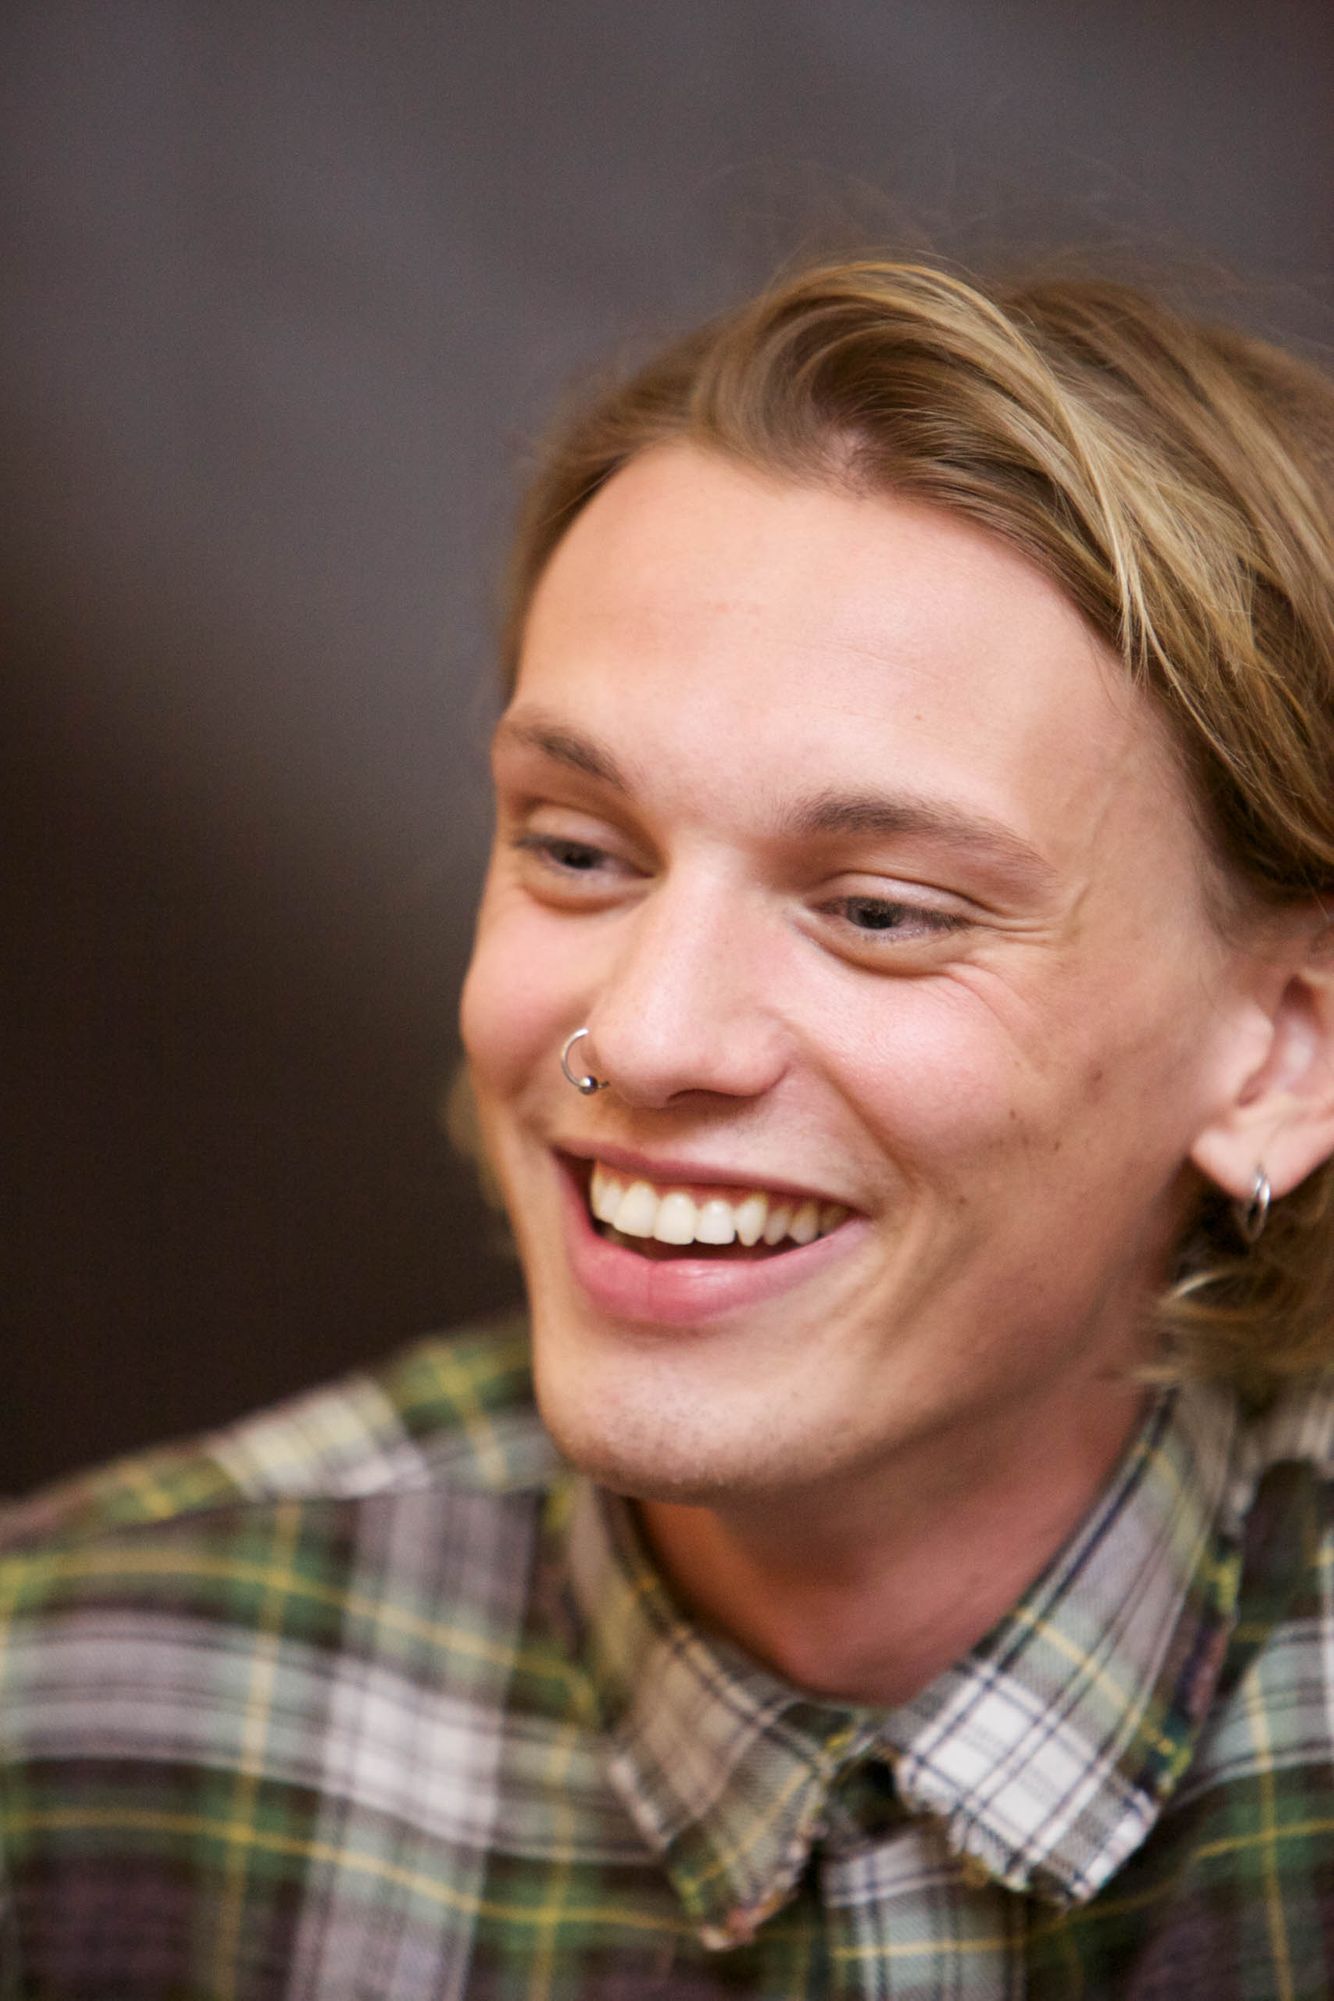 Jamie Campbell Bower By Chicago Celebrity Entertainment Event Photographer Jeff Schear